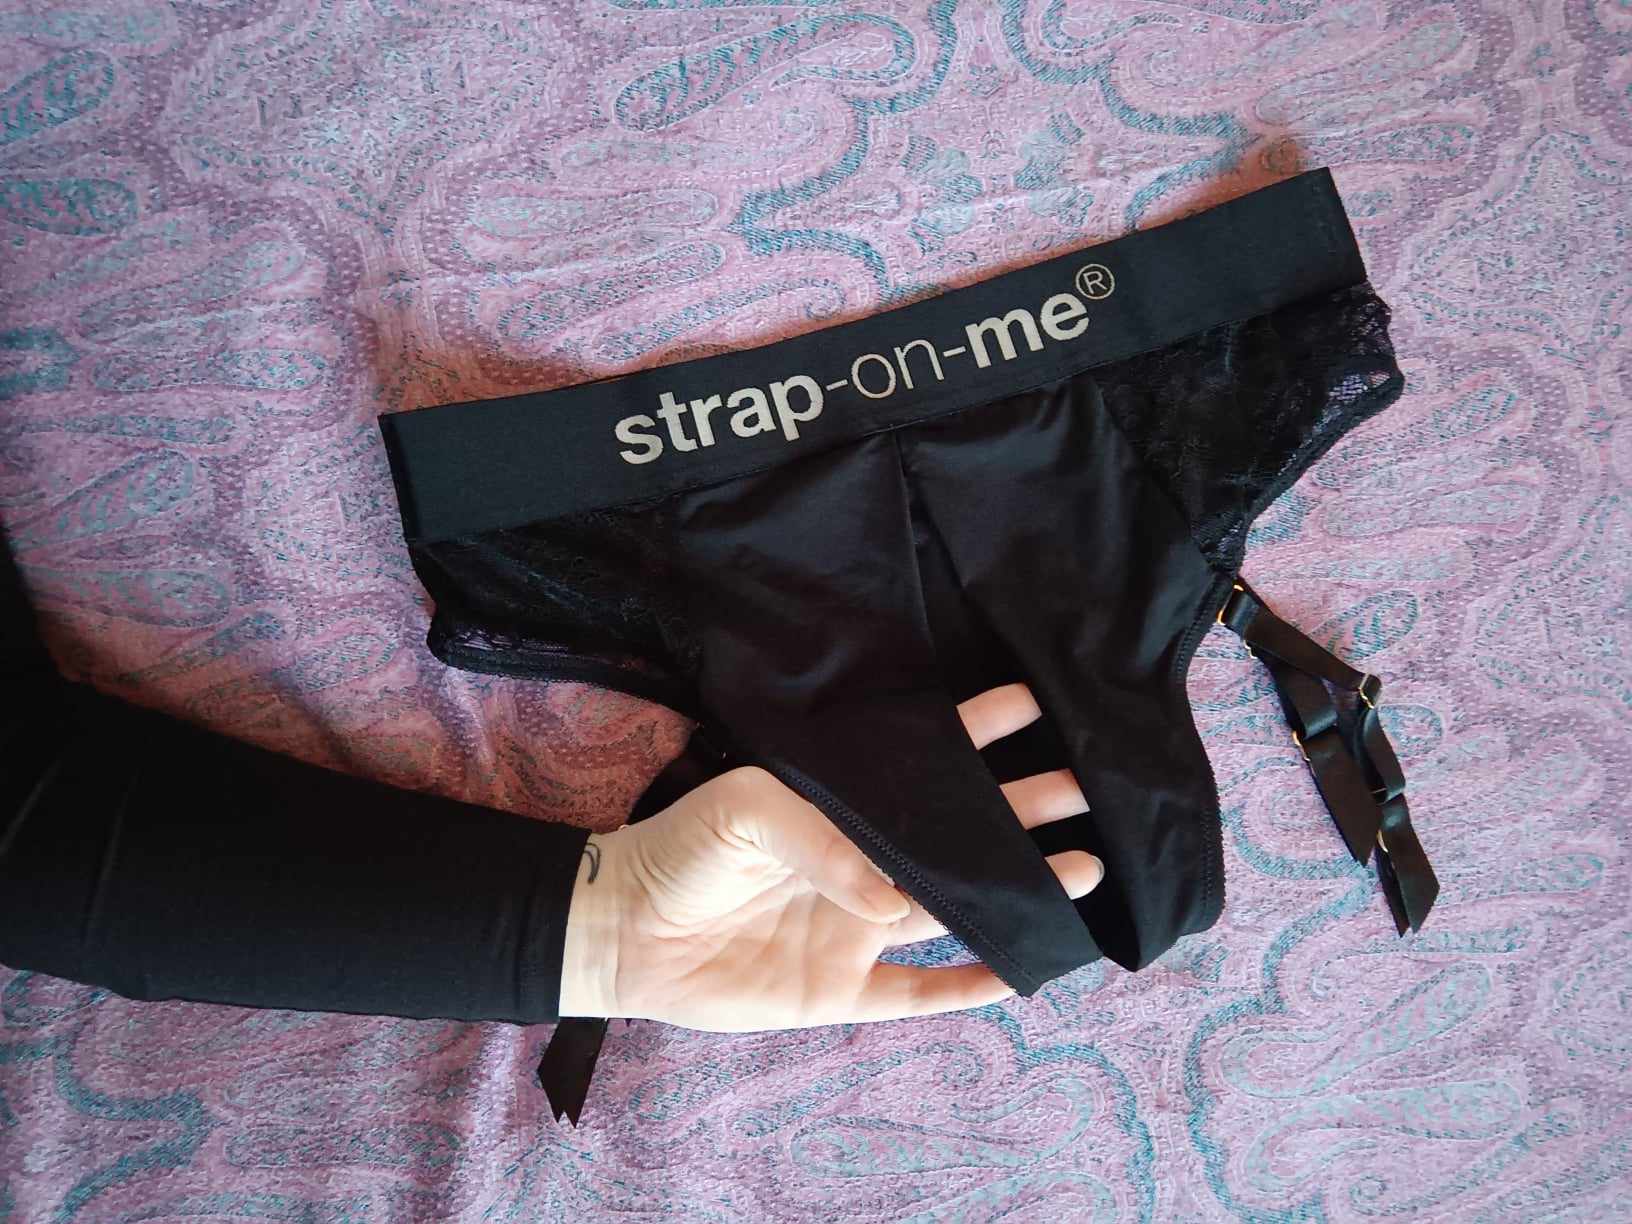 My Personal Experiences with Strap-On-Me Diva Harness